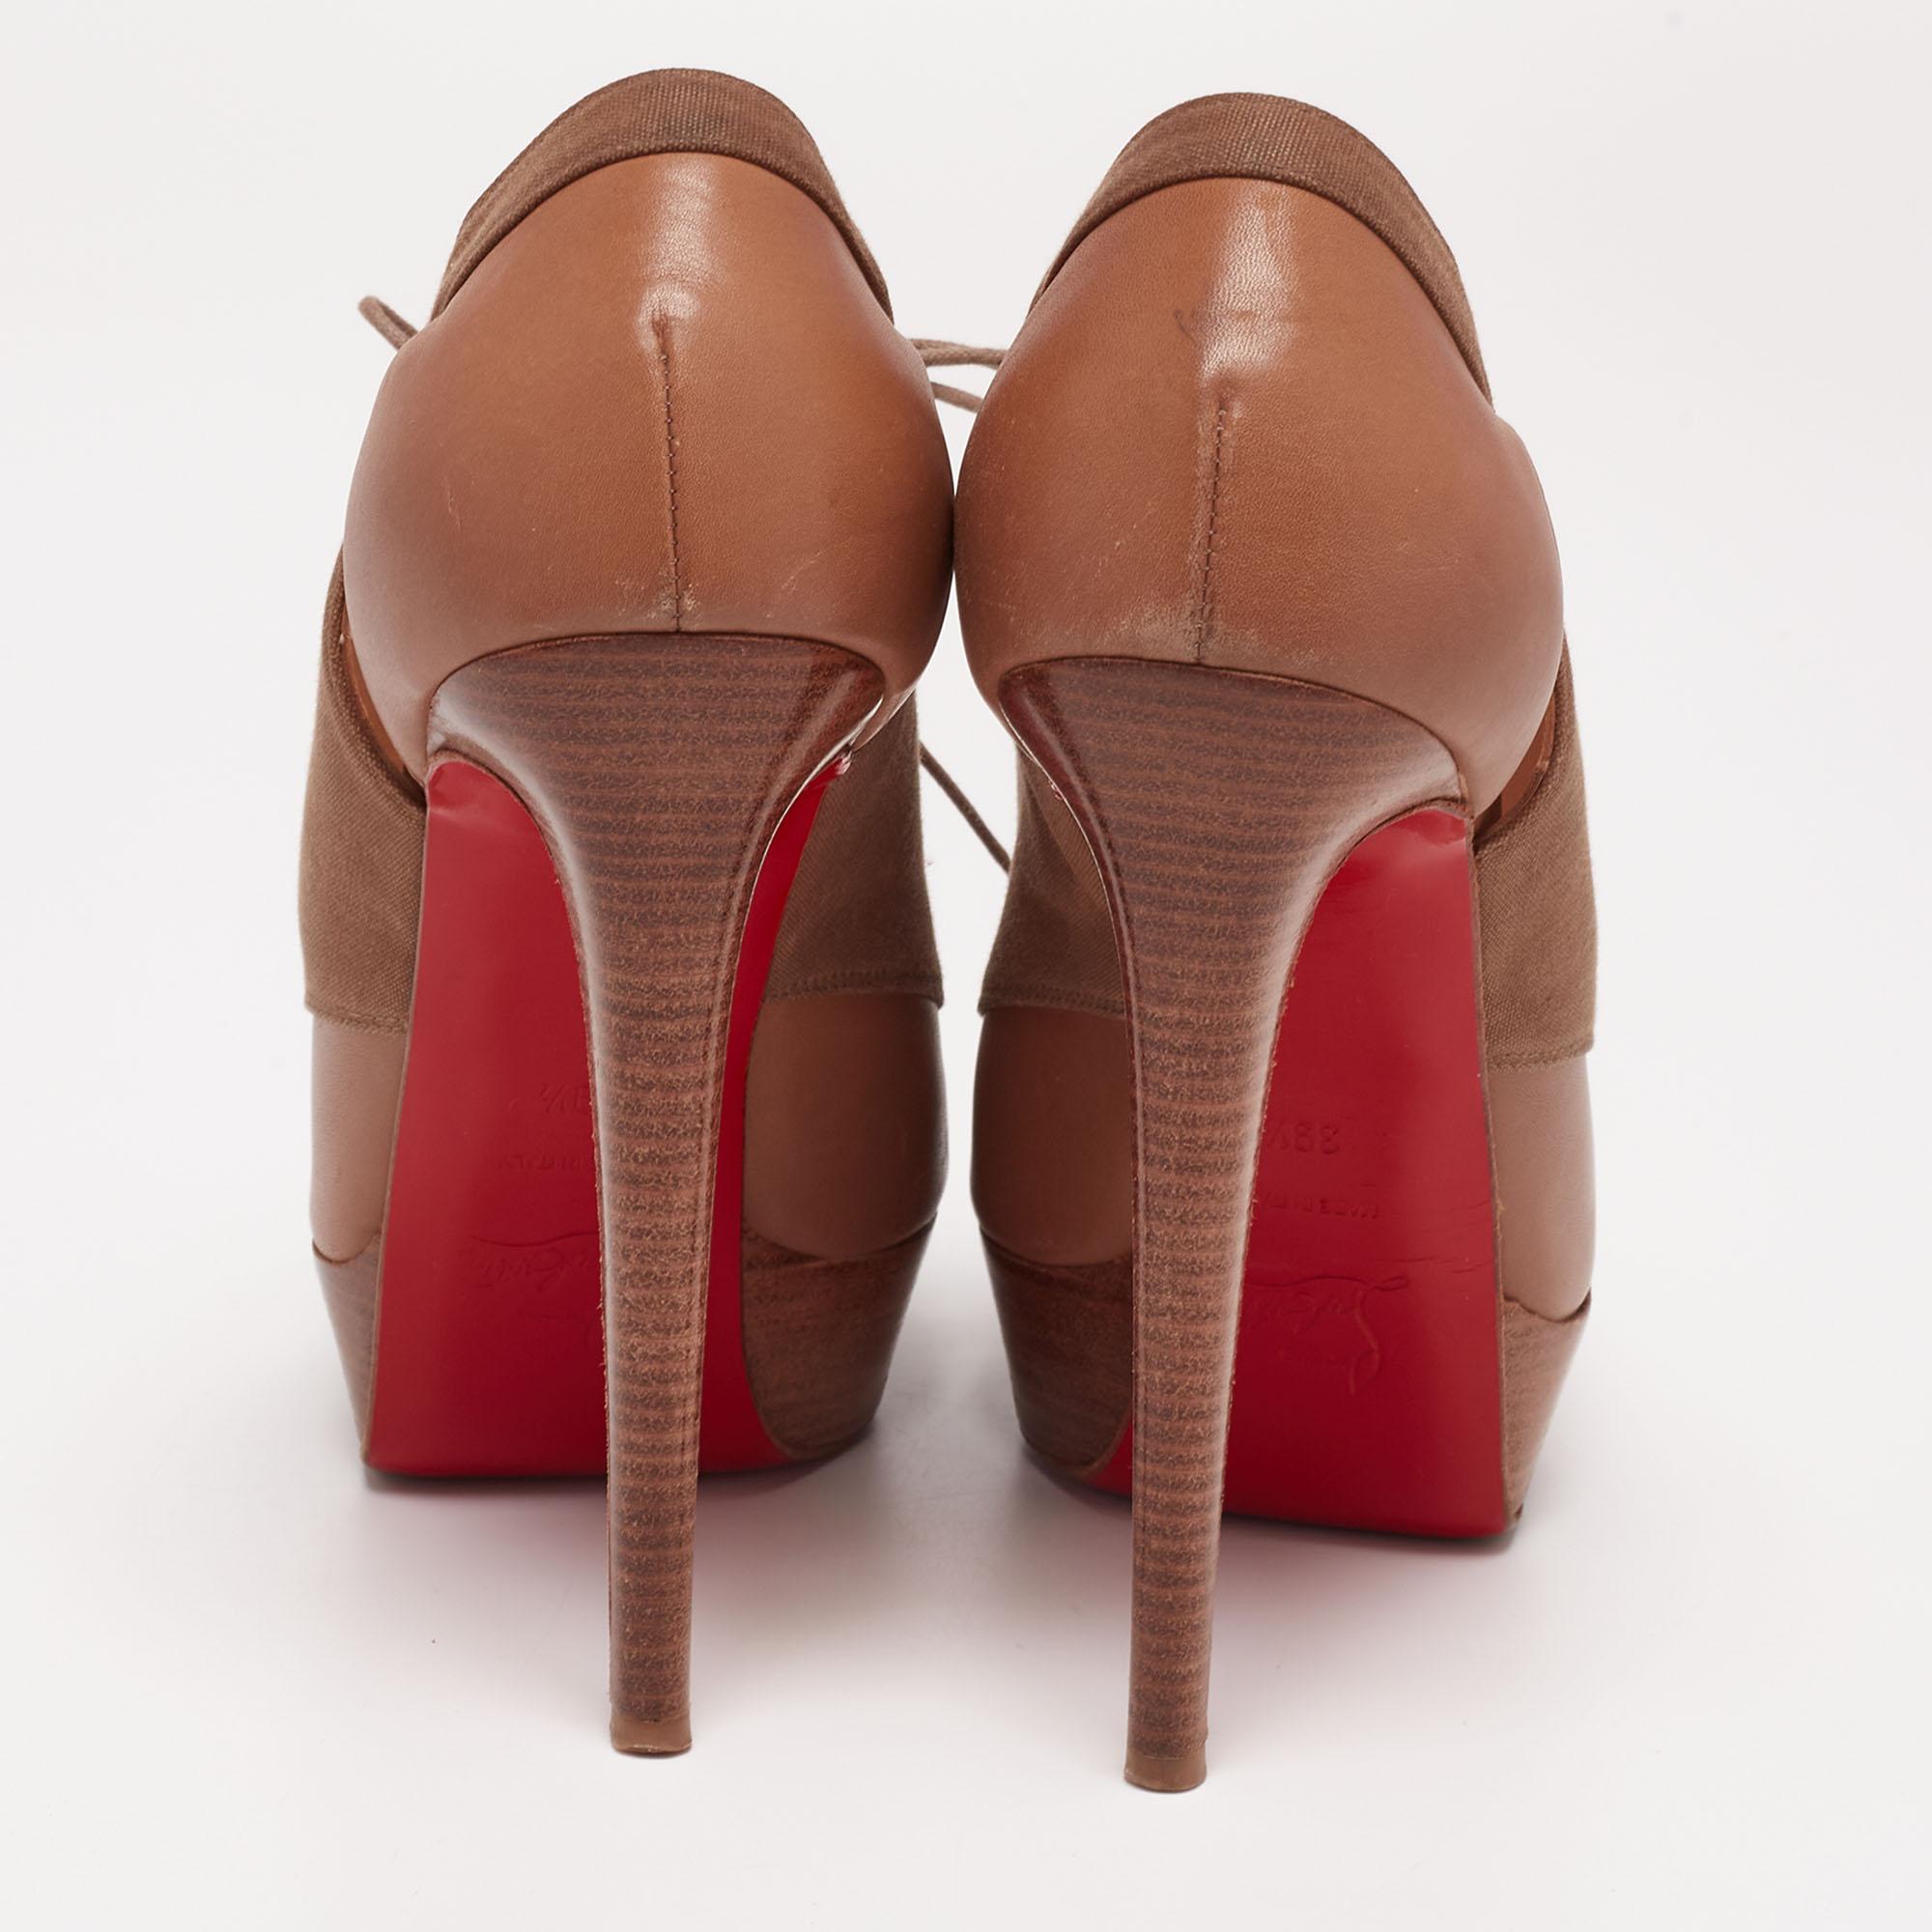 christian louboutin lace up heels